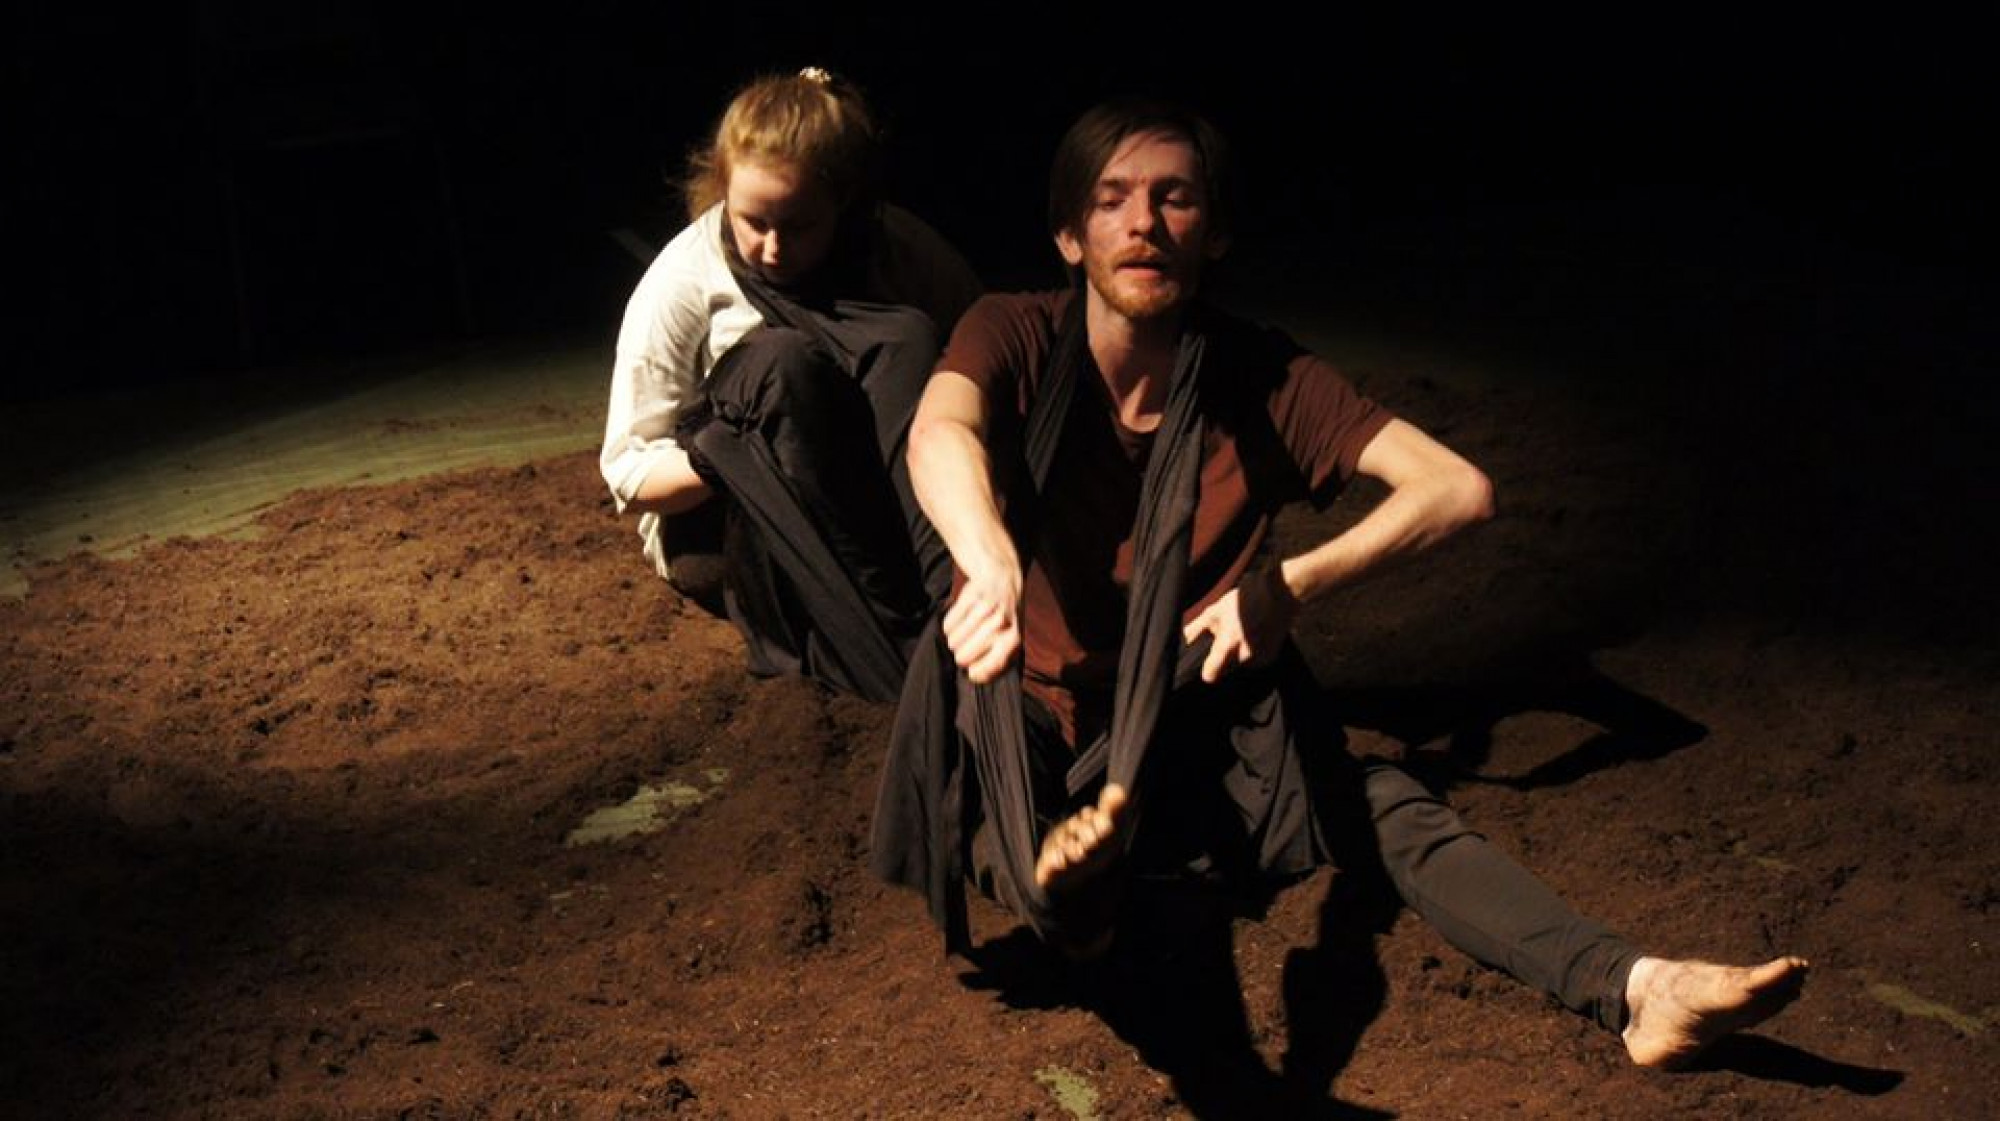 Two performers sit in moody lighting surrounded by black drapes and mud.